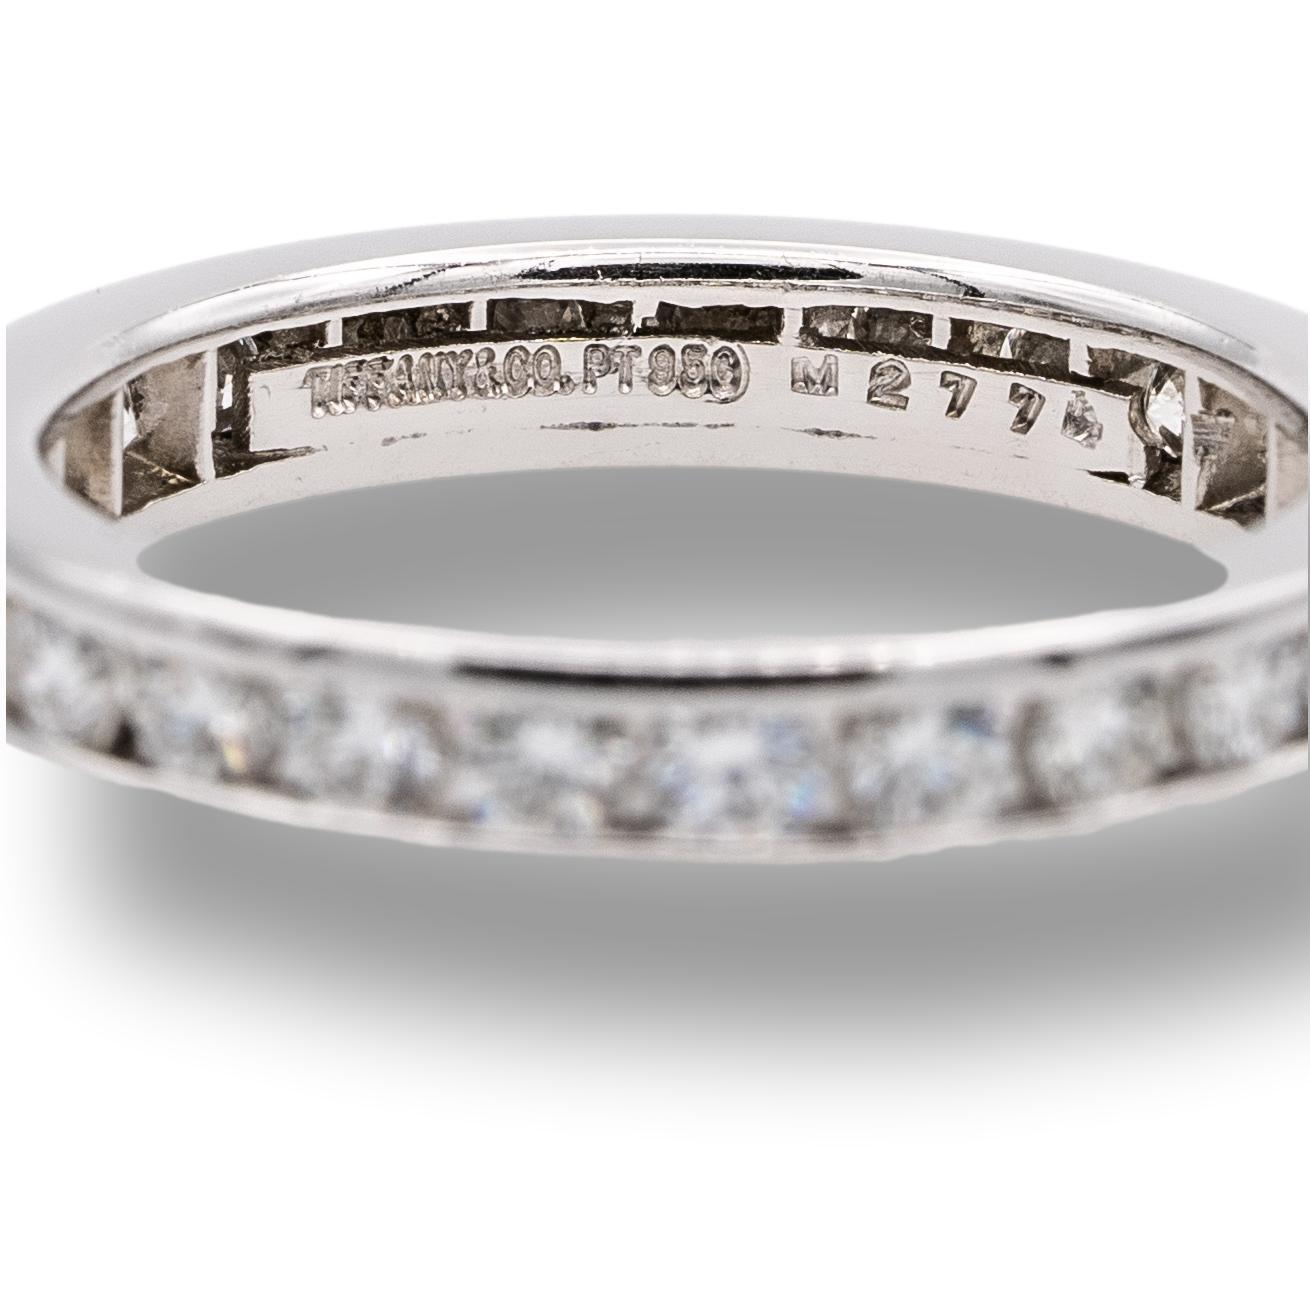 Tiffany & Co. wedding band finely crafted in platinum with 25 round brilliant cut diamonds weighing 0.93 carats total weight approximately set all the way around in a channel setting. The ring is 3mm wide. 

Brand: Tiffany & Co.

Hallmarks: Tiffany